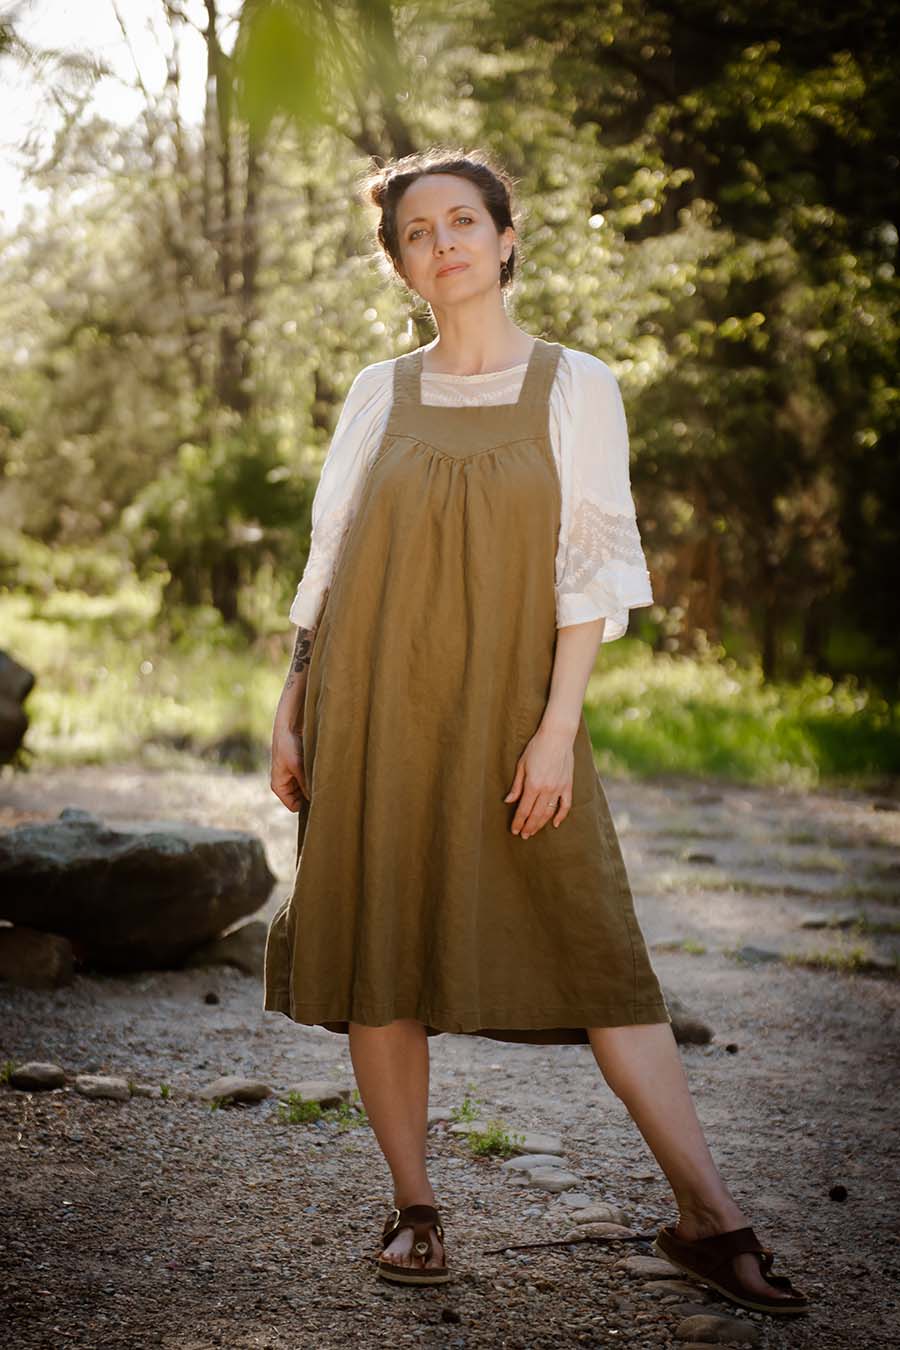 Woman wearing the Petrichor Pinafore sewing pattern from Sew Liberated on The Fold Line. A pinafore dress with a yoke, gathers, and deep pockets.